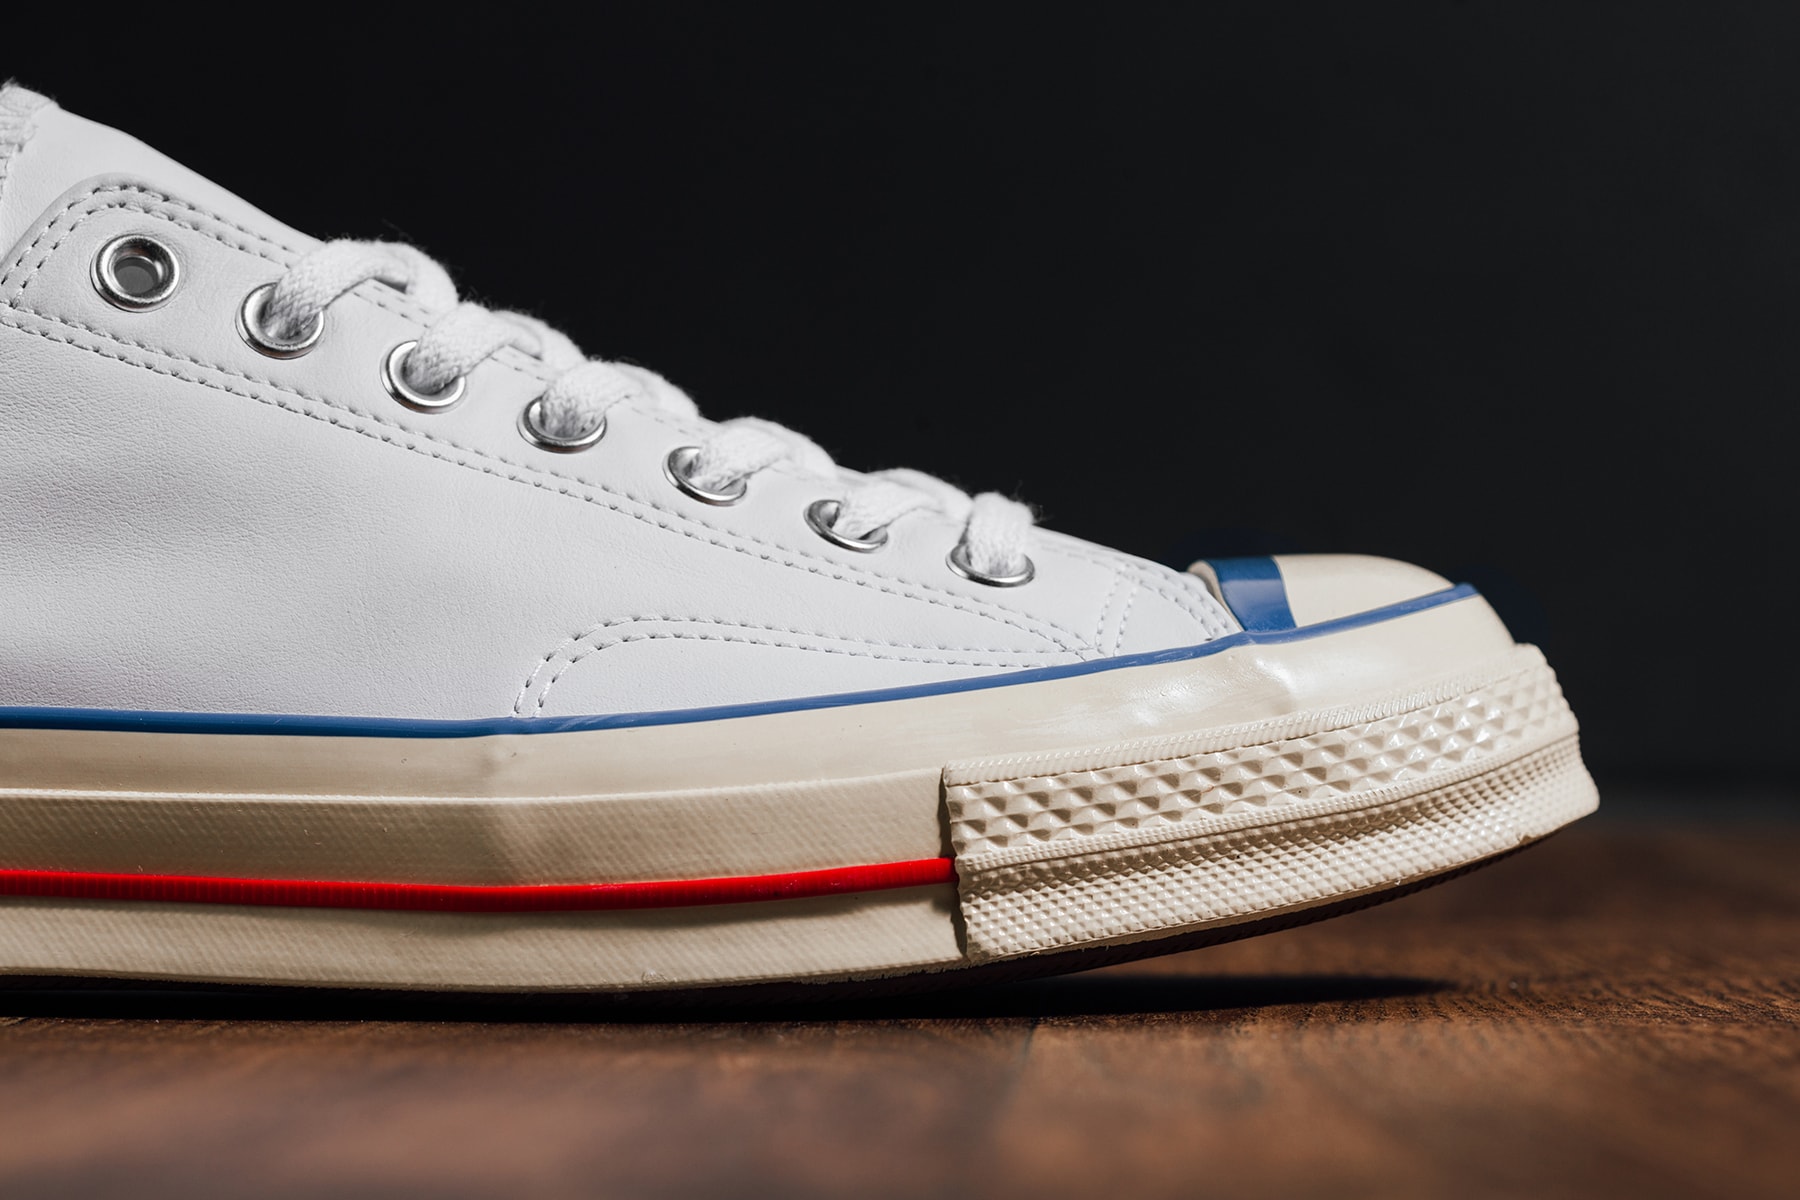 Converse Chuck Taylor All Star Low「Leather」釋出 